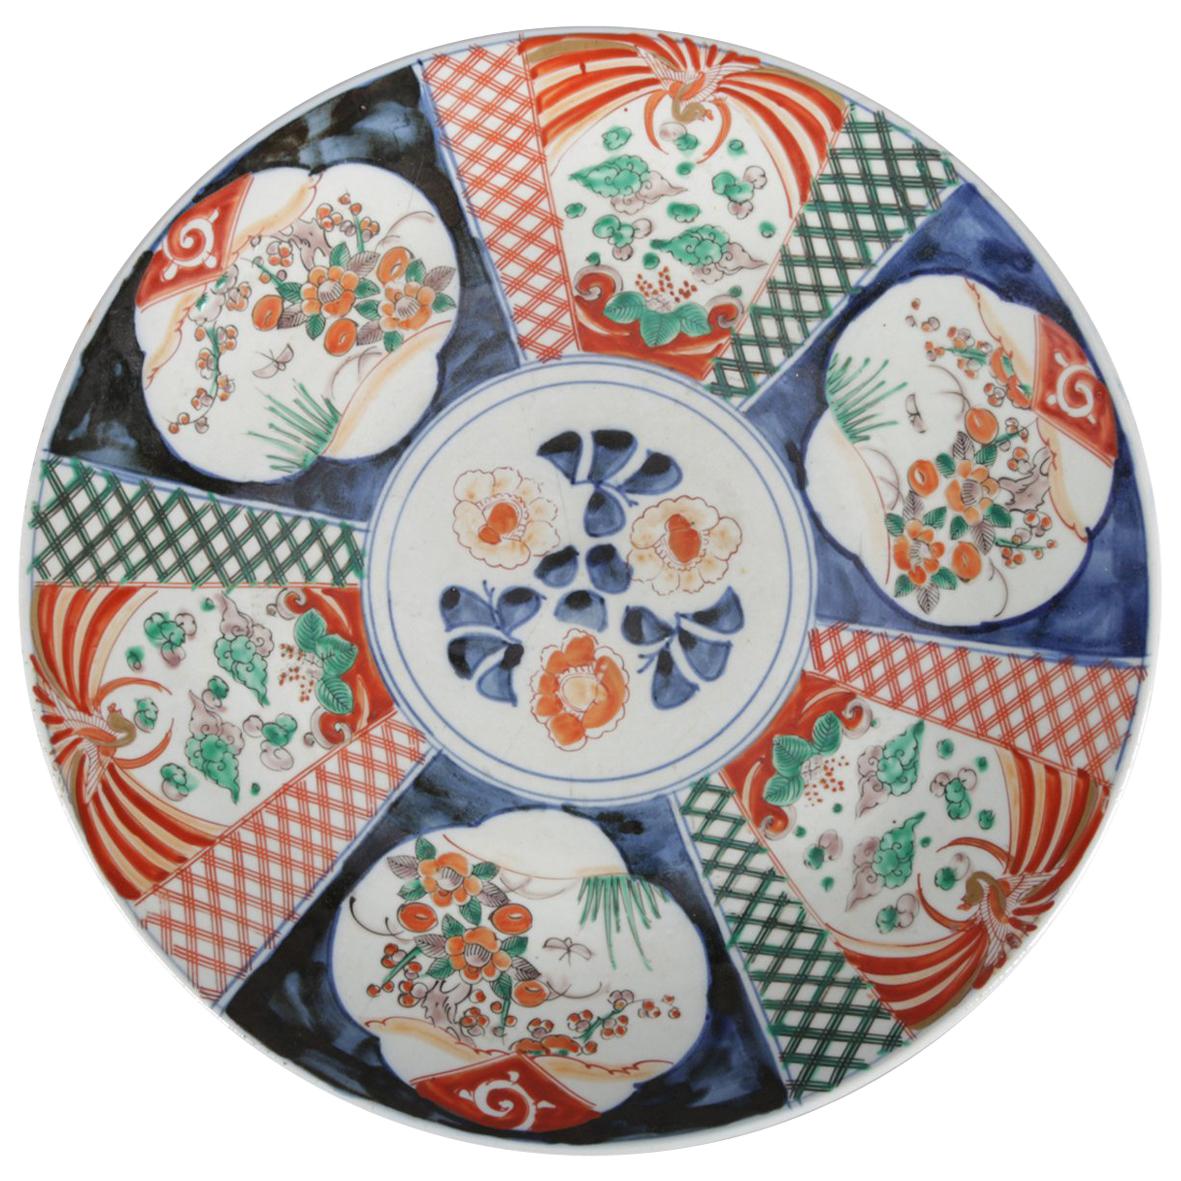 Antique Japanese Hand-Painted Floral Imari Porcelain Charger, circa 1900